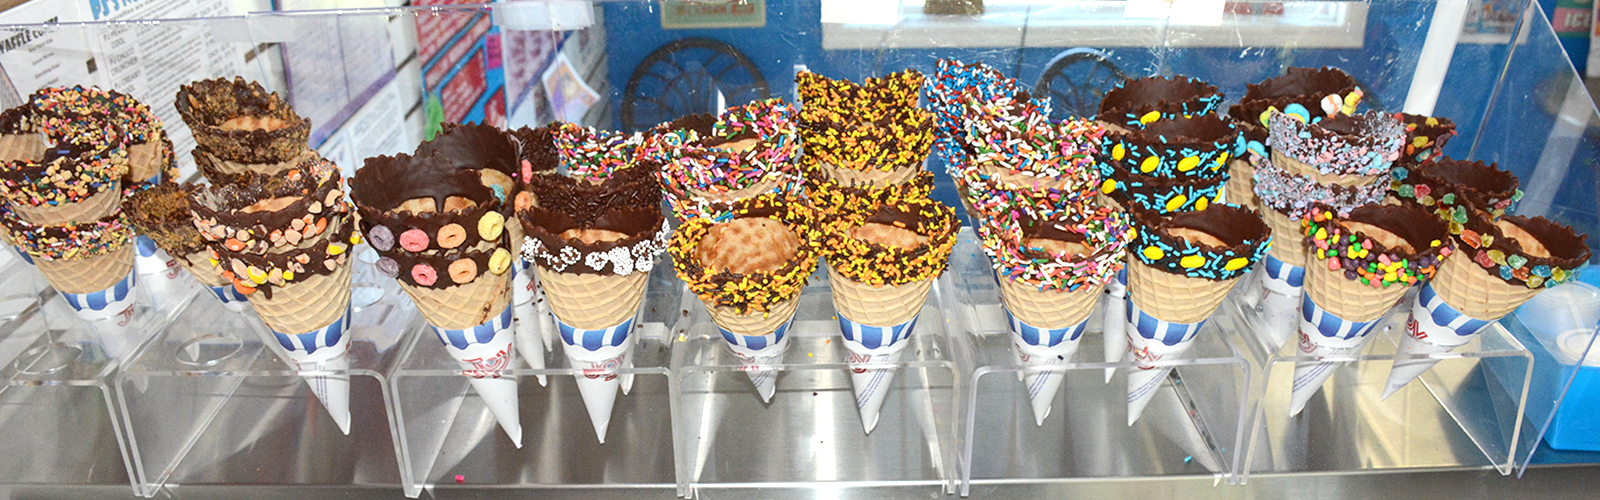 Specialty cones waiting to be filled at PJ Cools Ice Cream Shoppe, 6160 Transit Rd. in Depew.